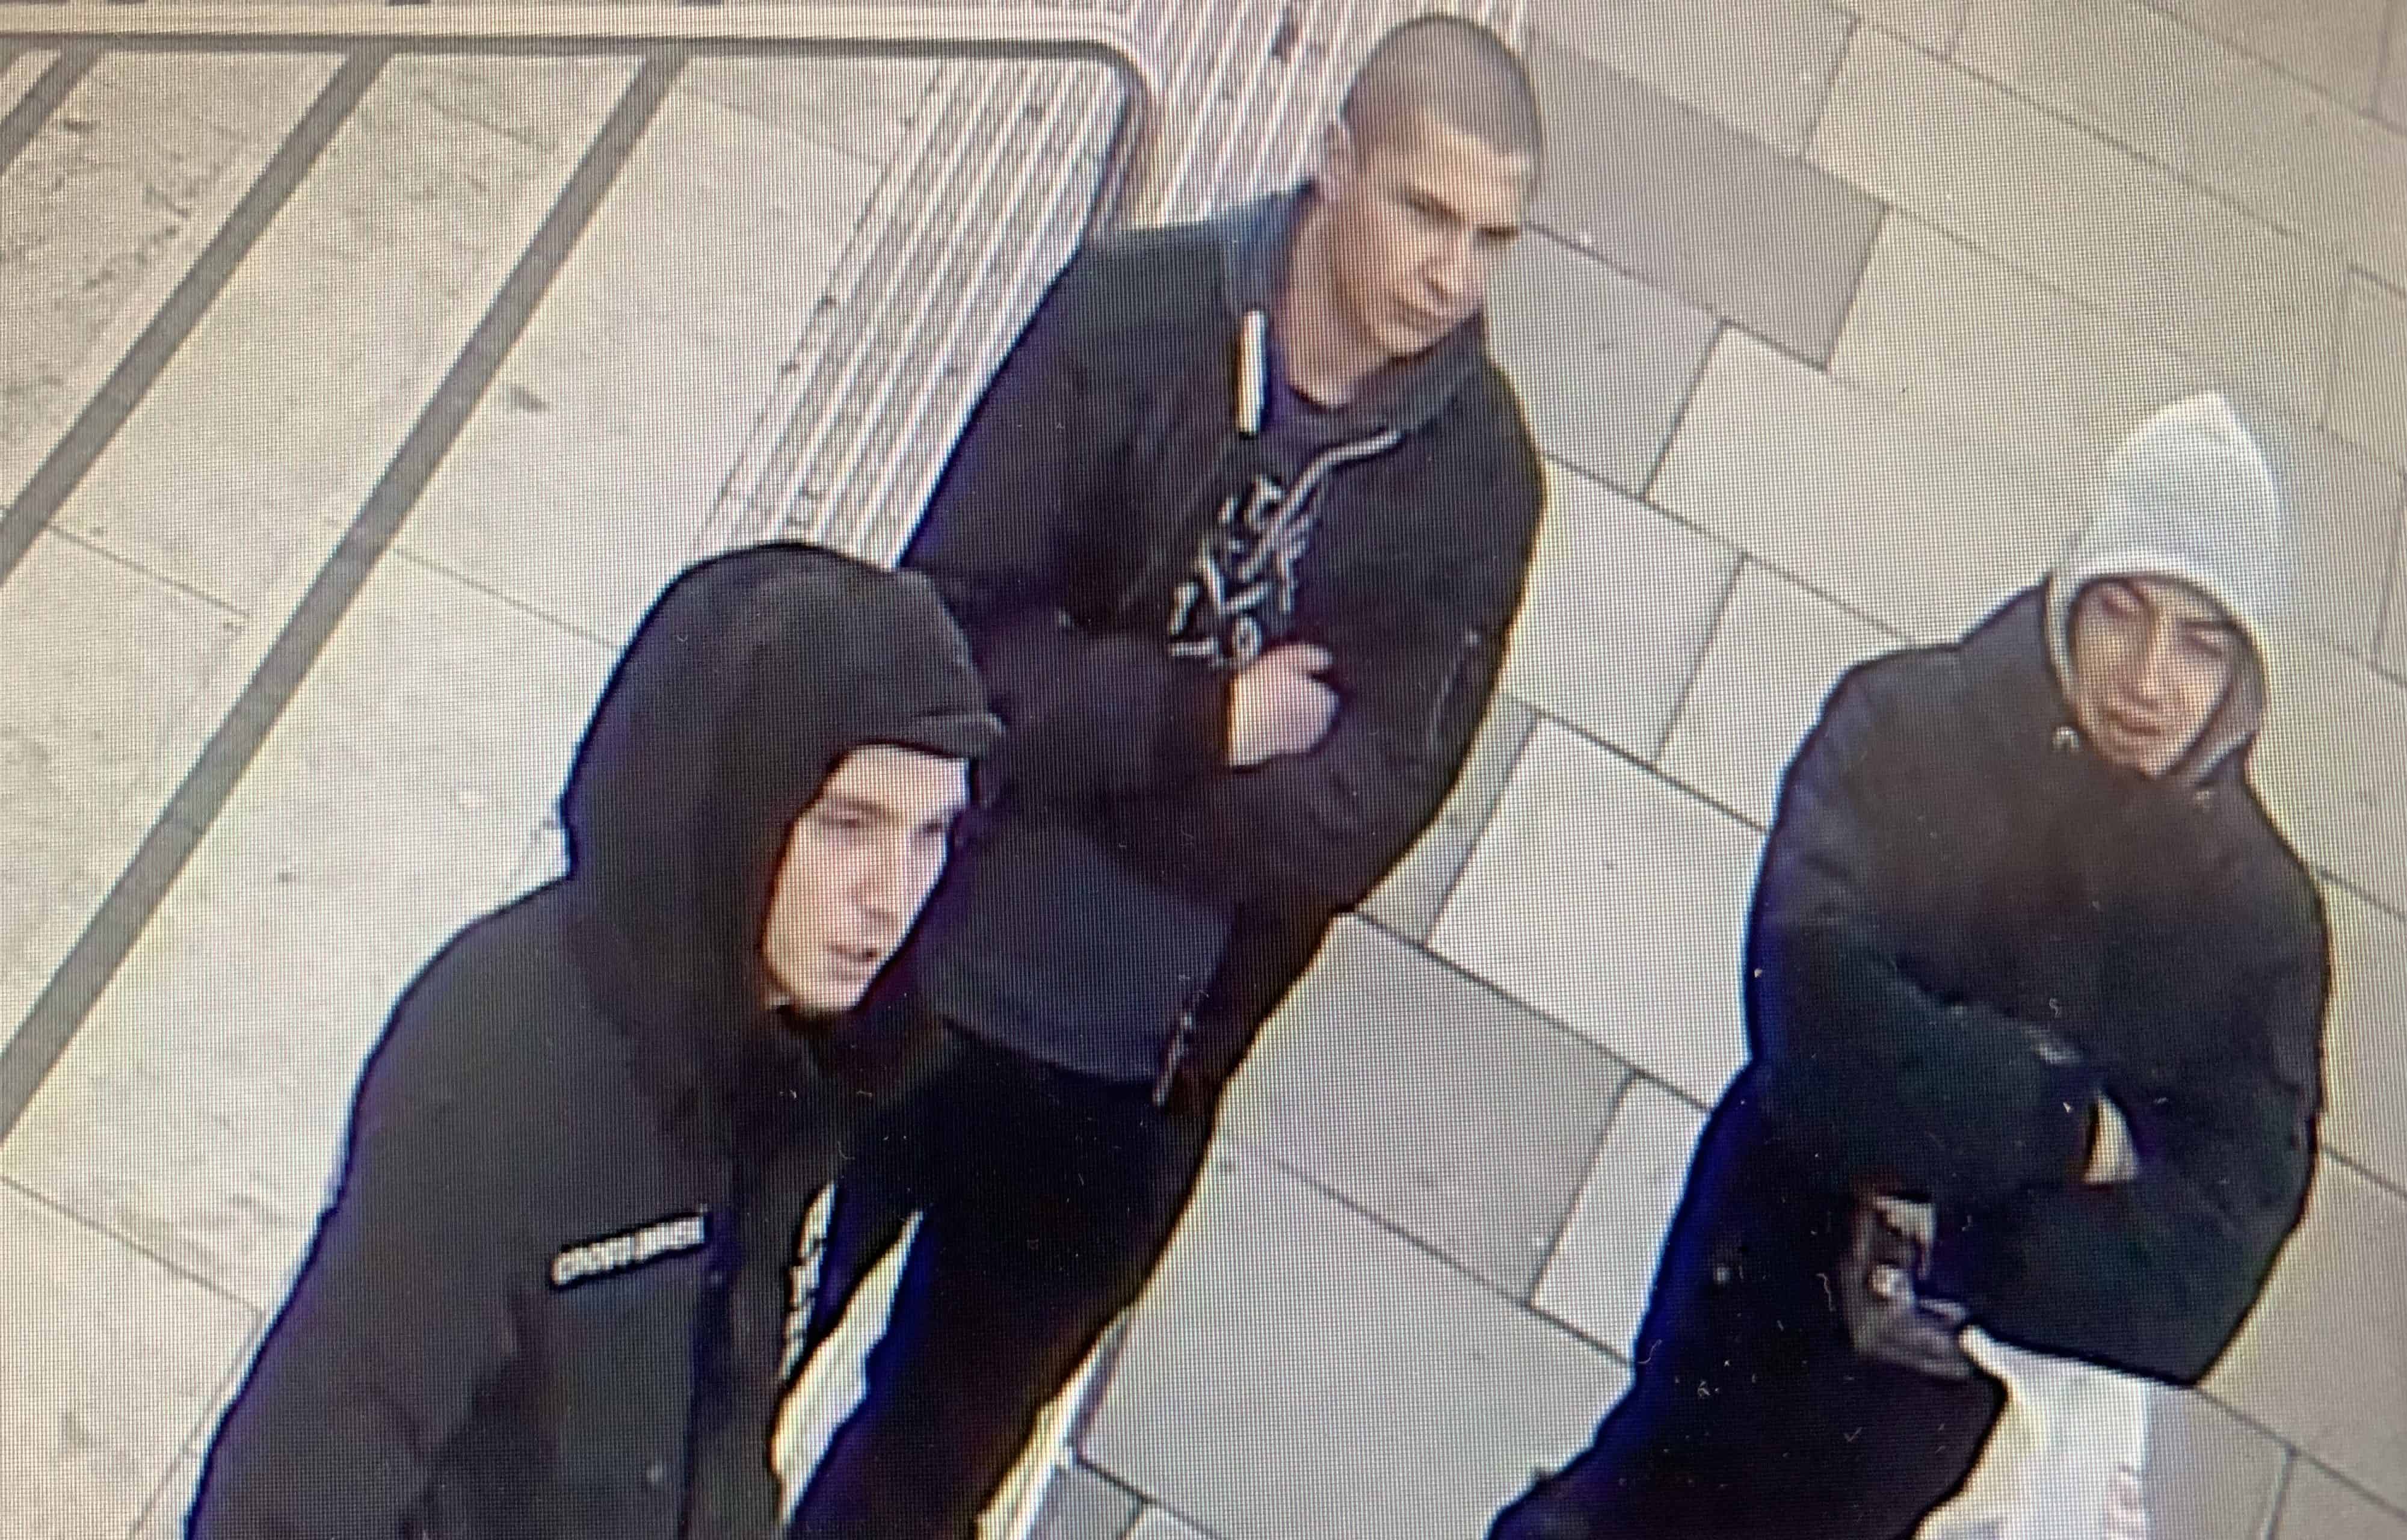 Police want to speak to these three men in connection with the unprovoked assault (Image: Met Police)